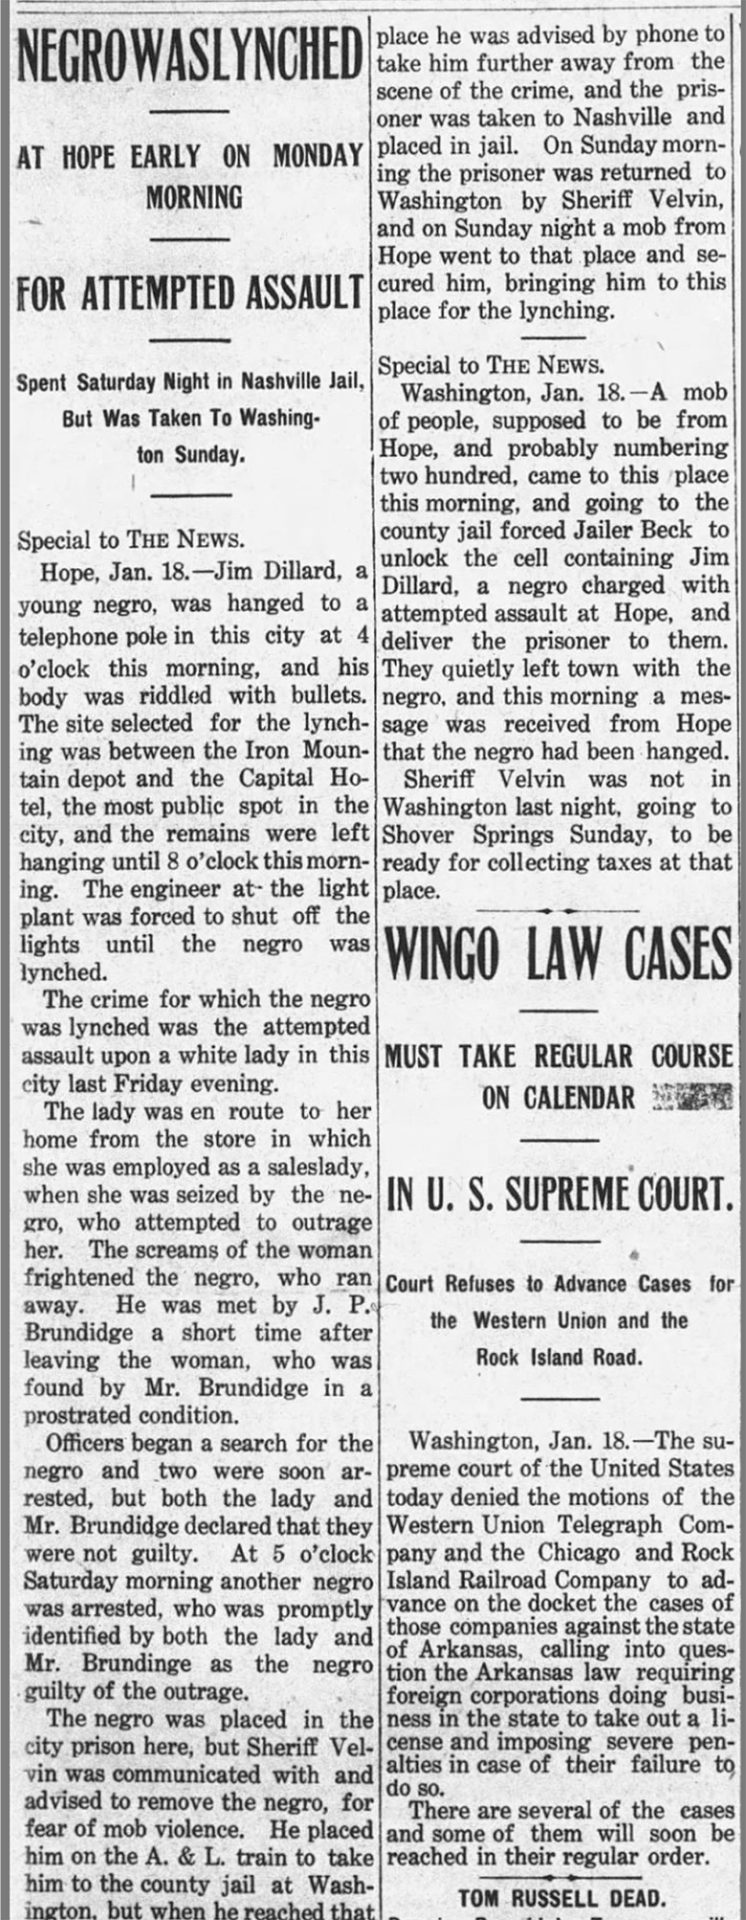 "Negro Was Lynched" newspaper clipping